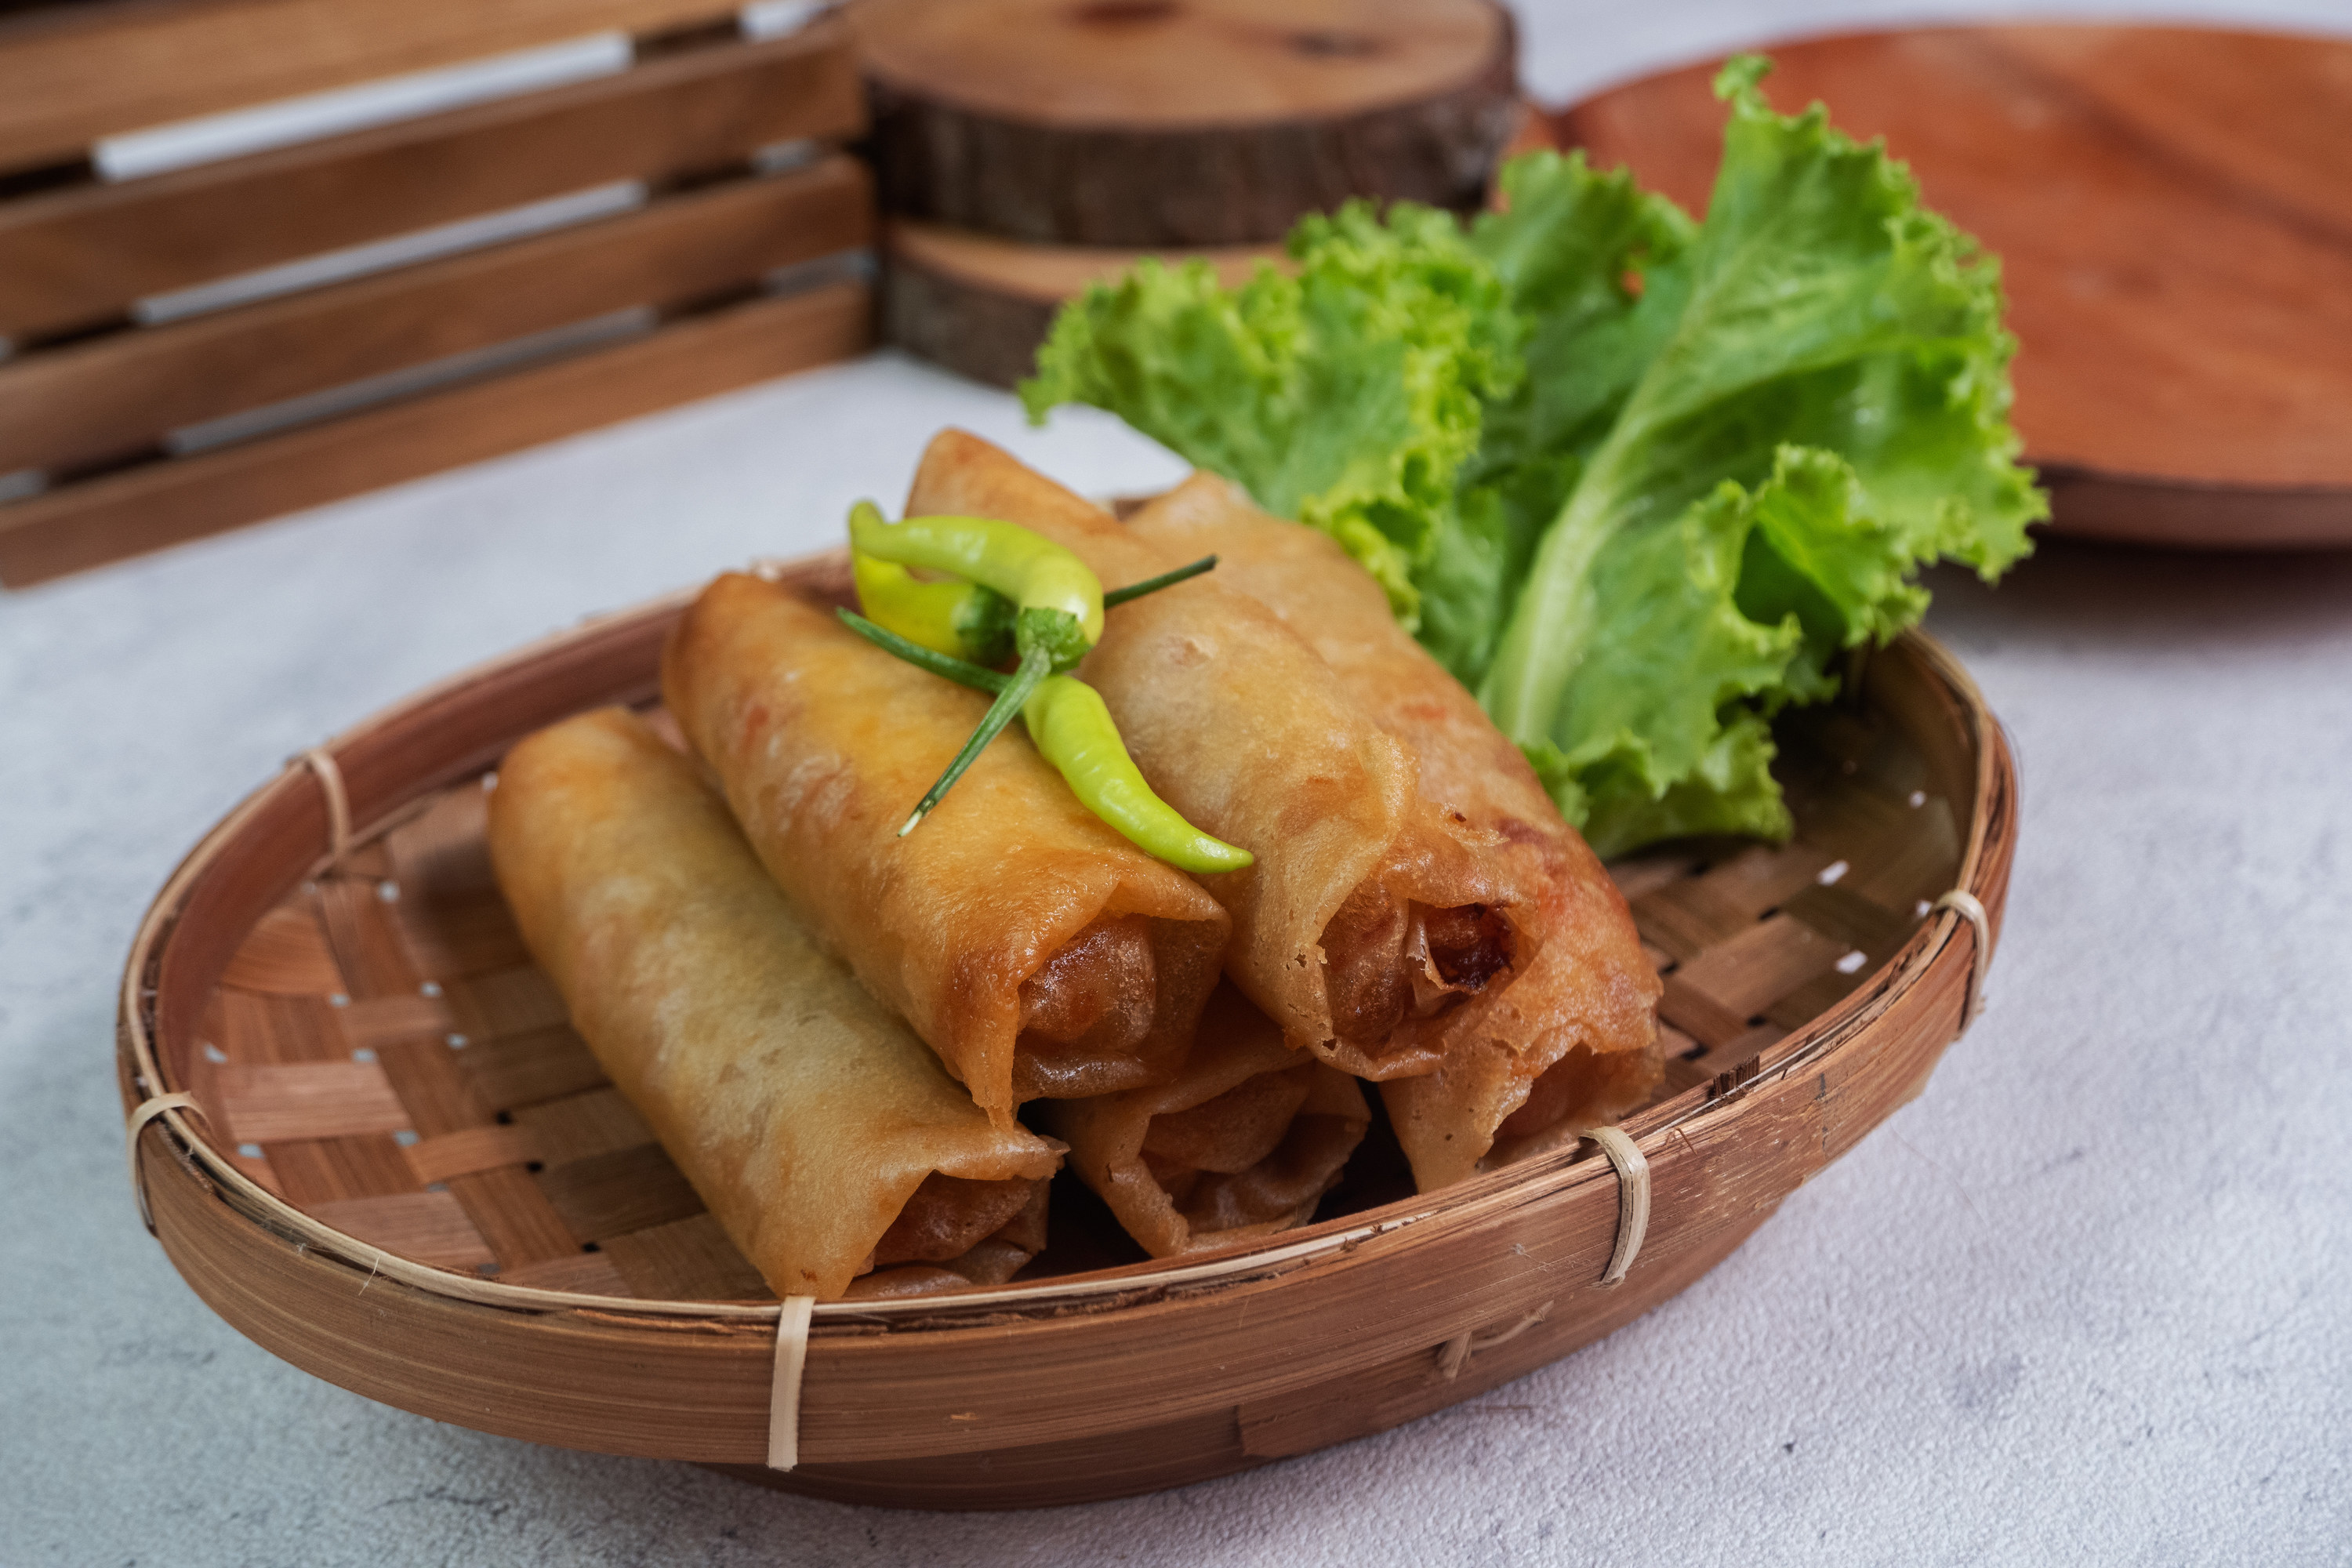 traditional spring rolls in basket next to lettuce as garnish